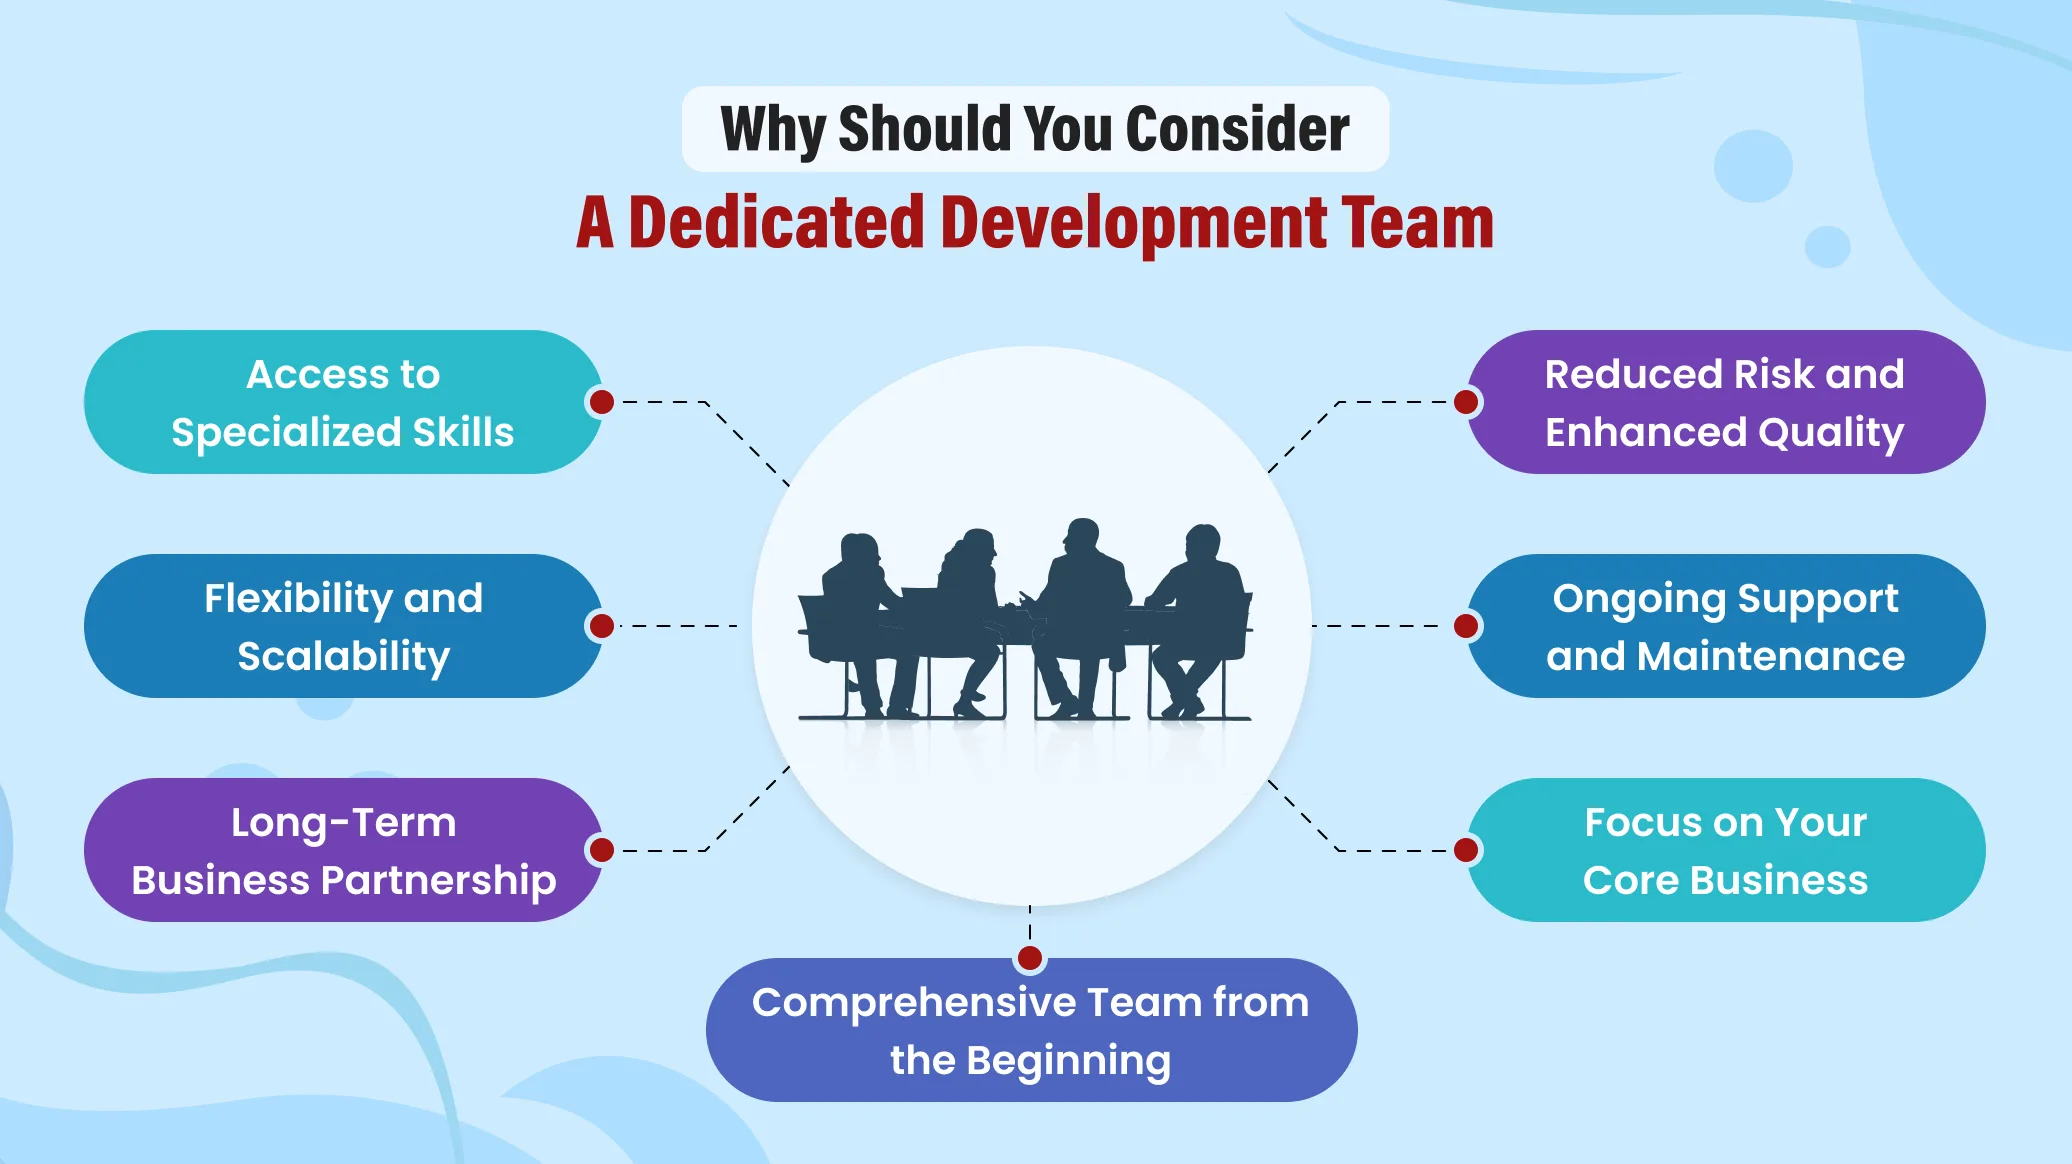 Why Should You Consider A Dedicated Development Team